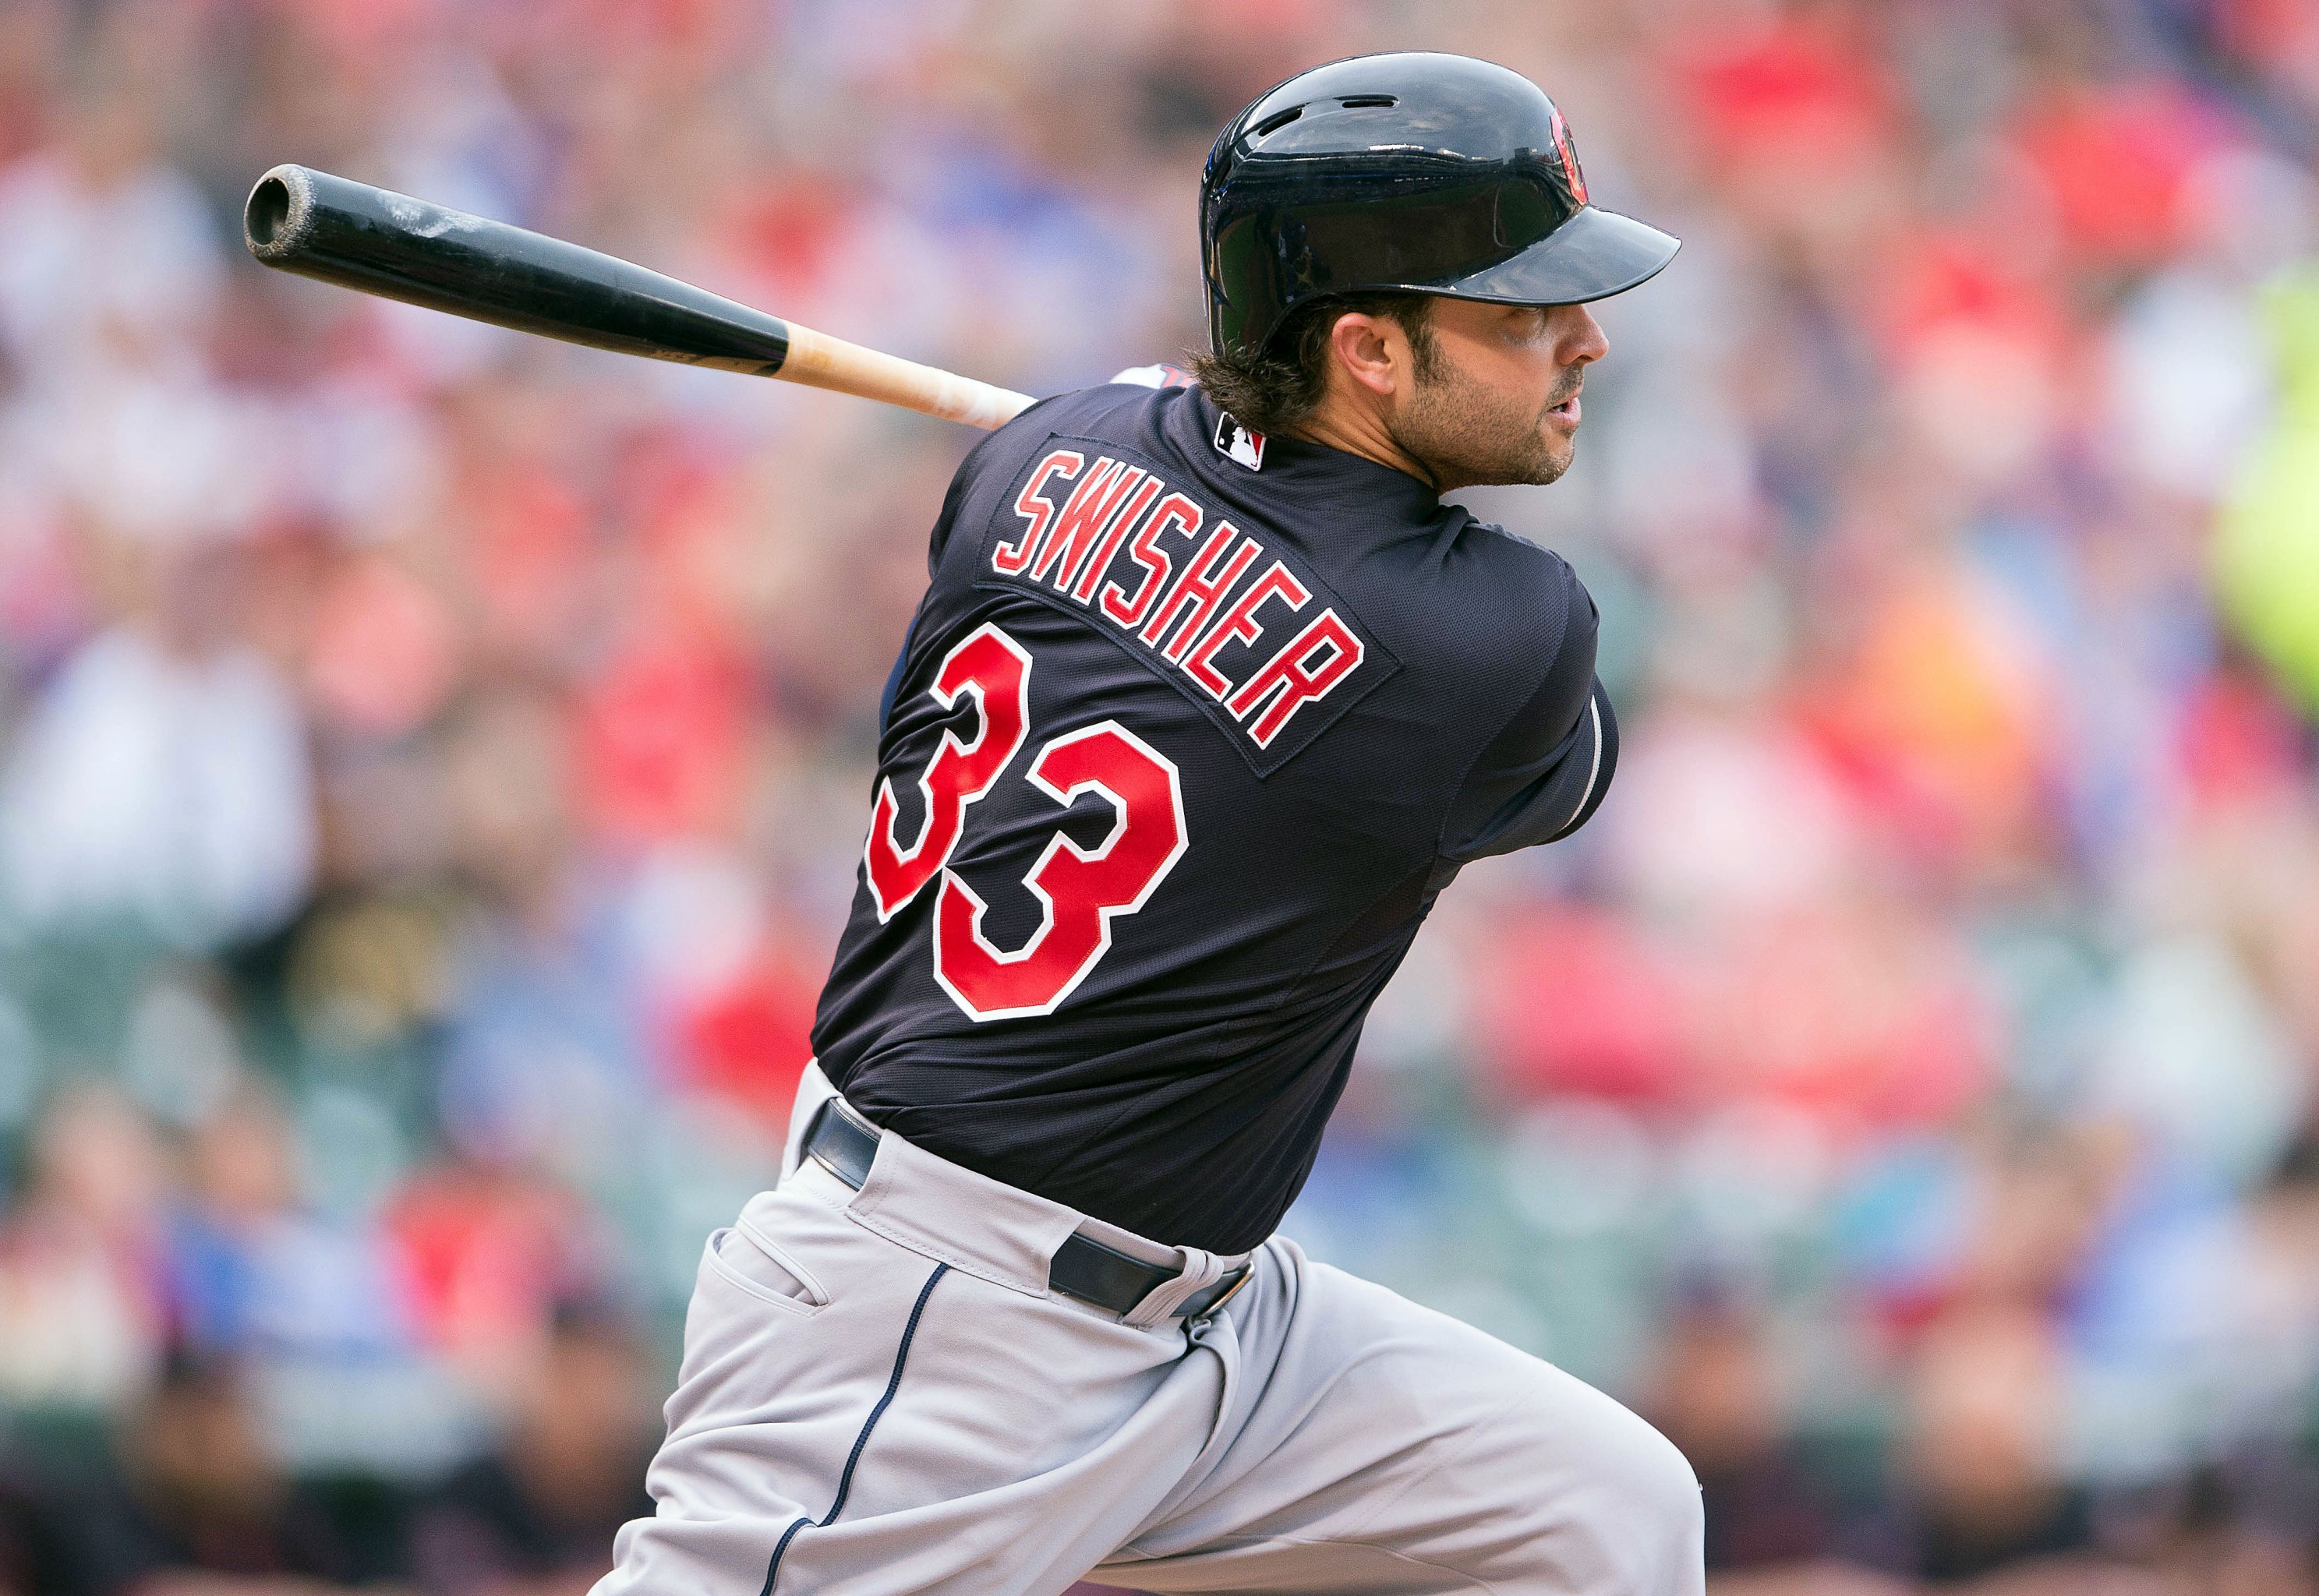 Indians trade Swisher, Bourn to Braves for Chris Johnson